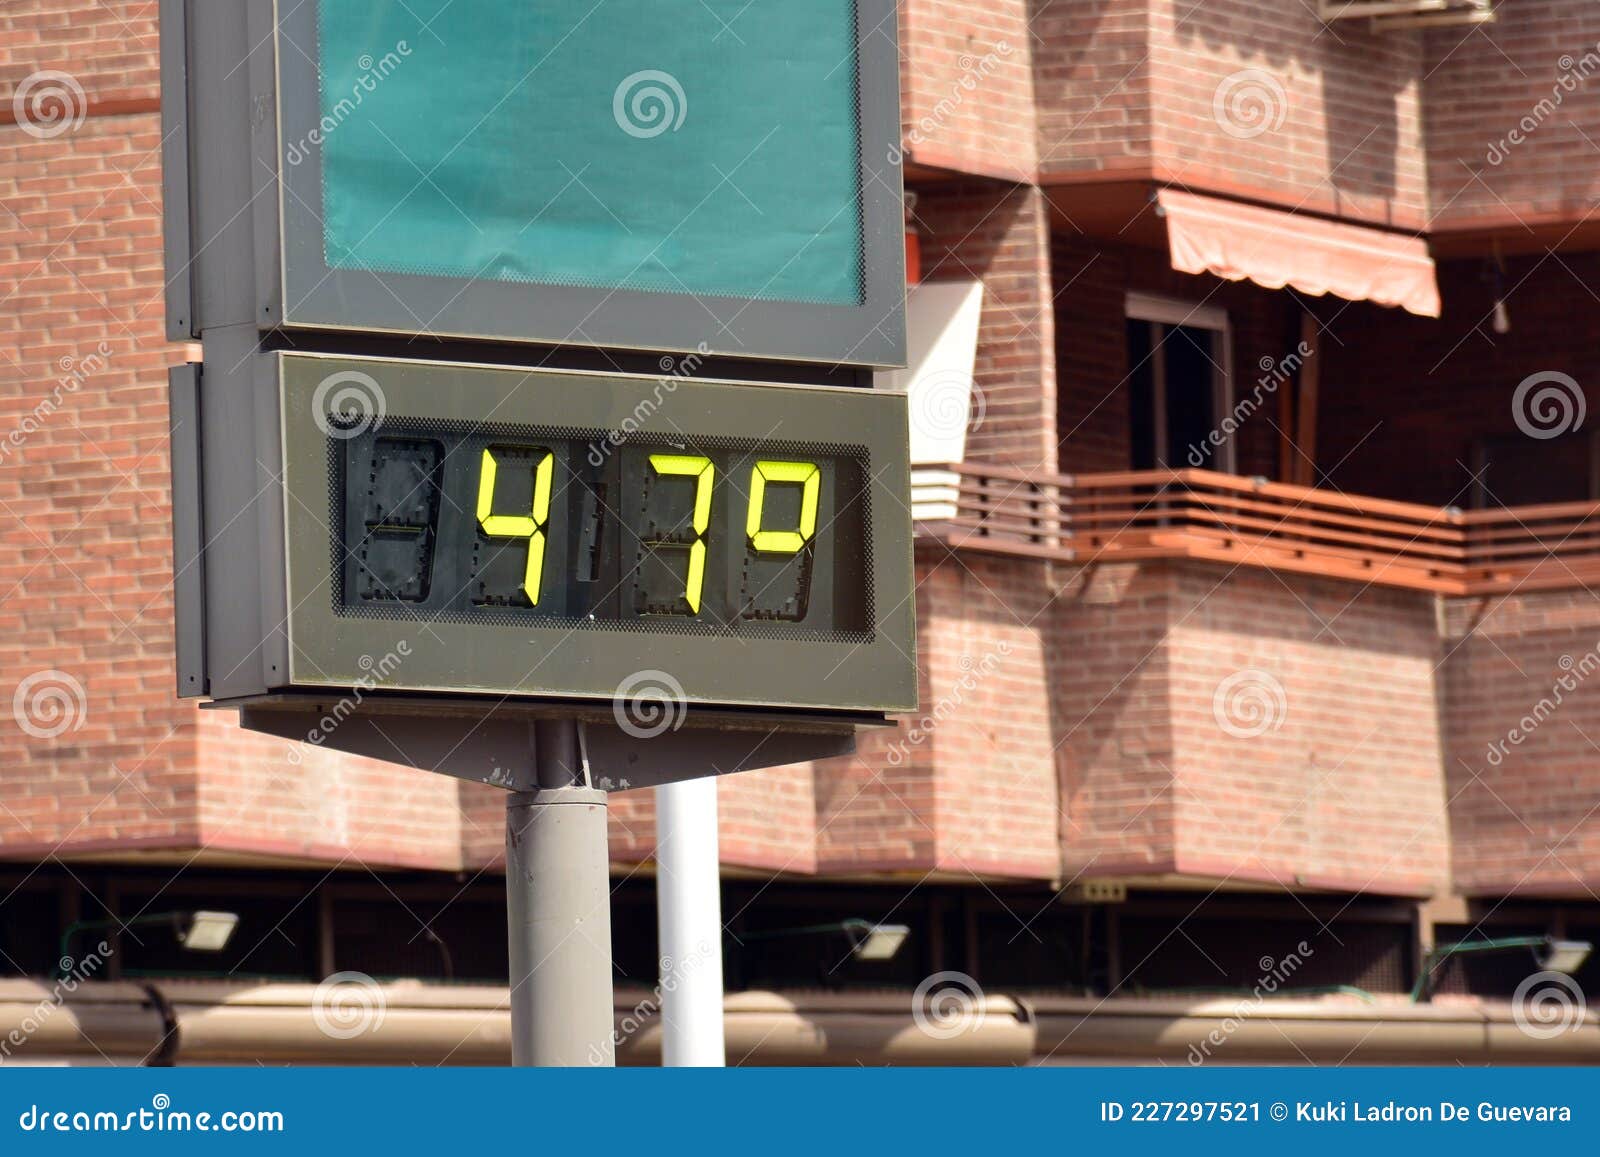 street thermometer marking 47 degrees